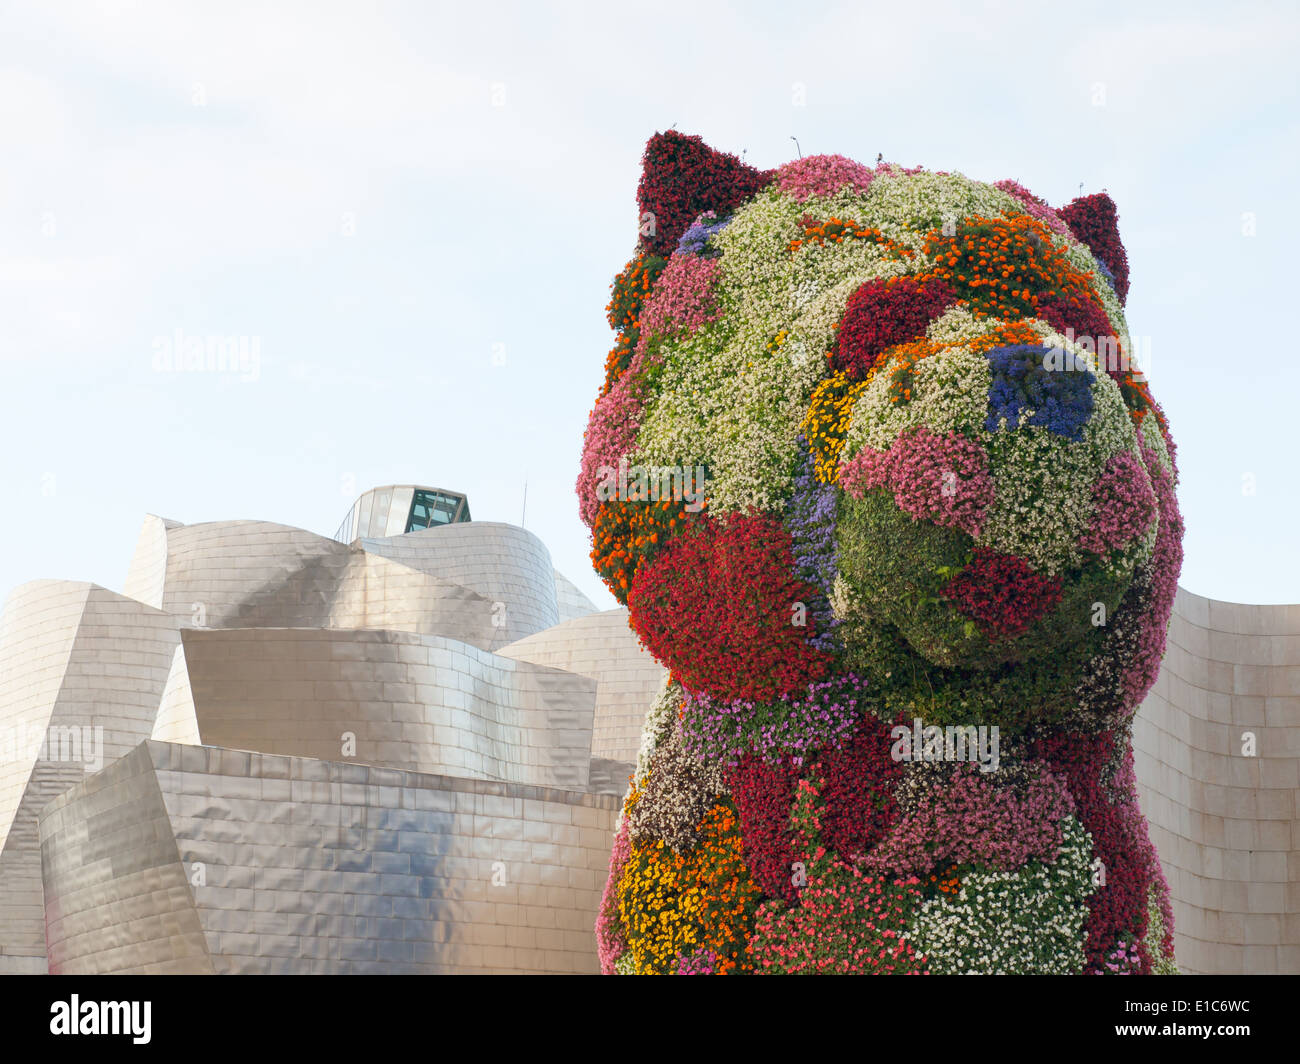 Illustrer Manifold kompas Puppy, a floral sculpture by Jeff Koons, stands guard in front of the  Guggenheim Museum Bilbao in Bilbao, Spain Stock Photo - Alamy